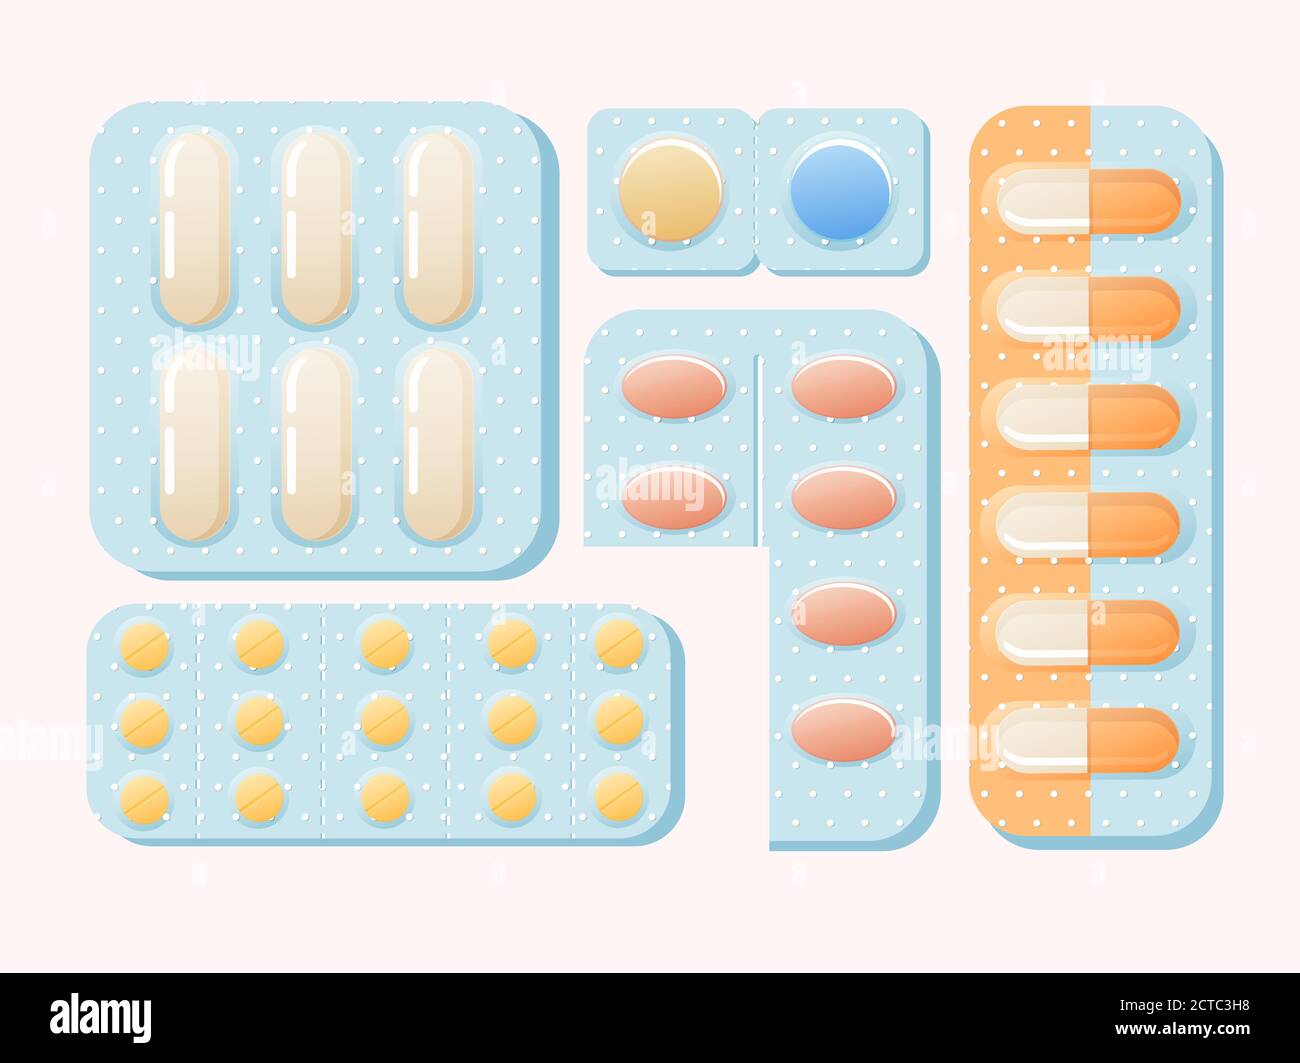 Blisters with pills and capsules illustration. Medicinal pain reliever powerful antibiotics red small yellow sedatives. Stock Vector